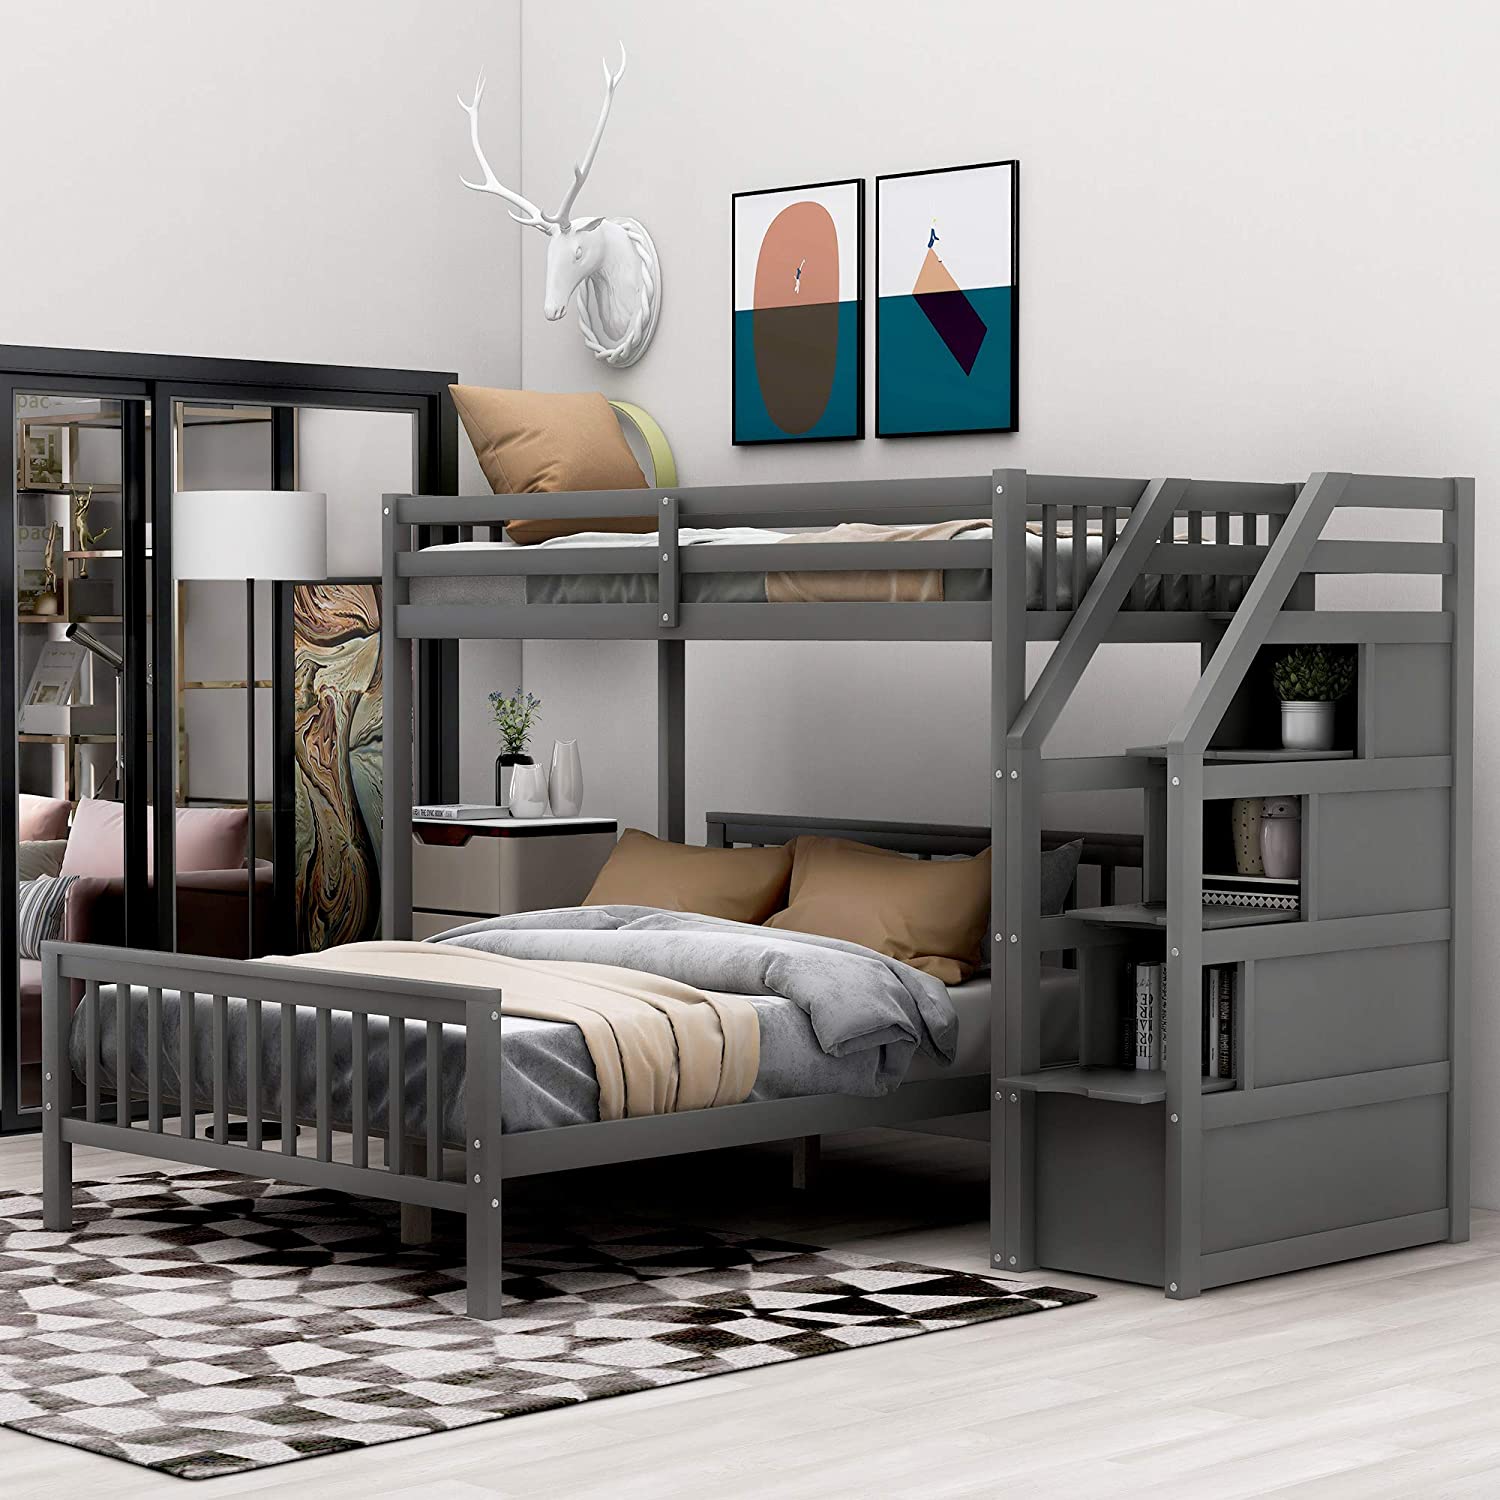 Space saving bunk beds twin over full for kids!